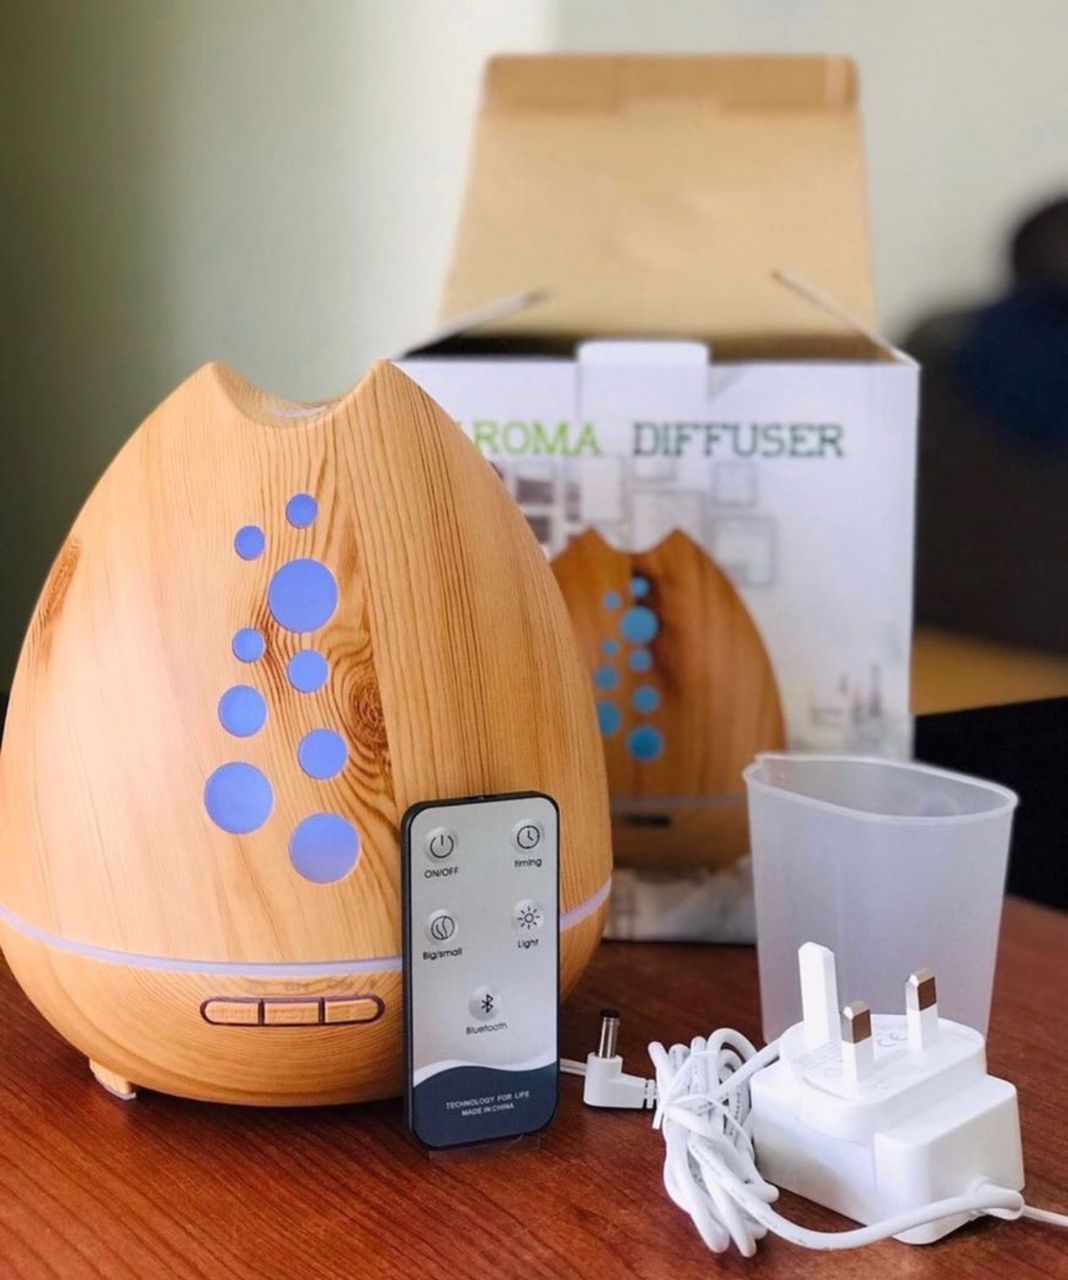 400ml aroma diffuser with remote control and Bluetooth speaker.